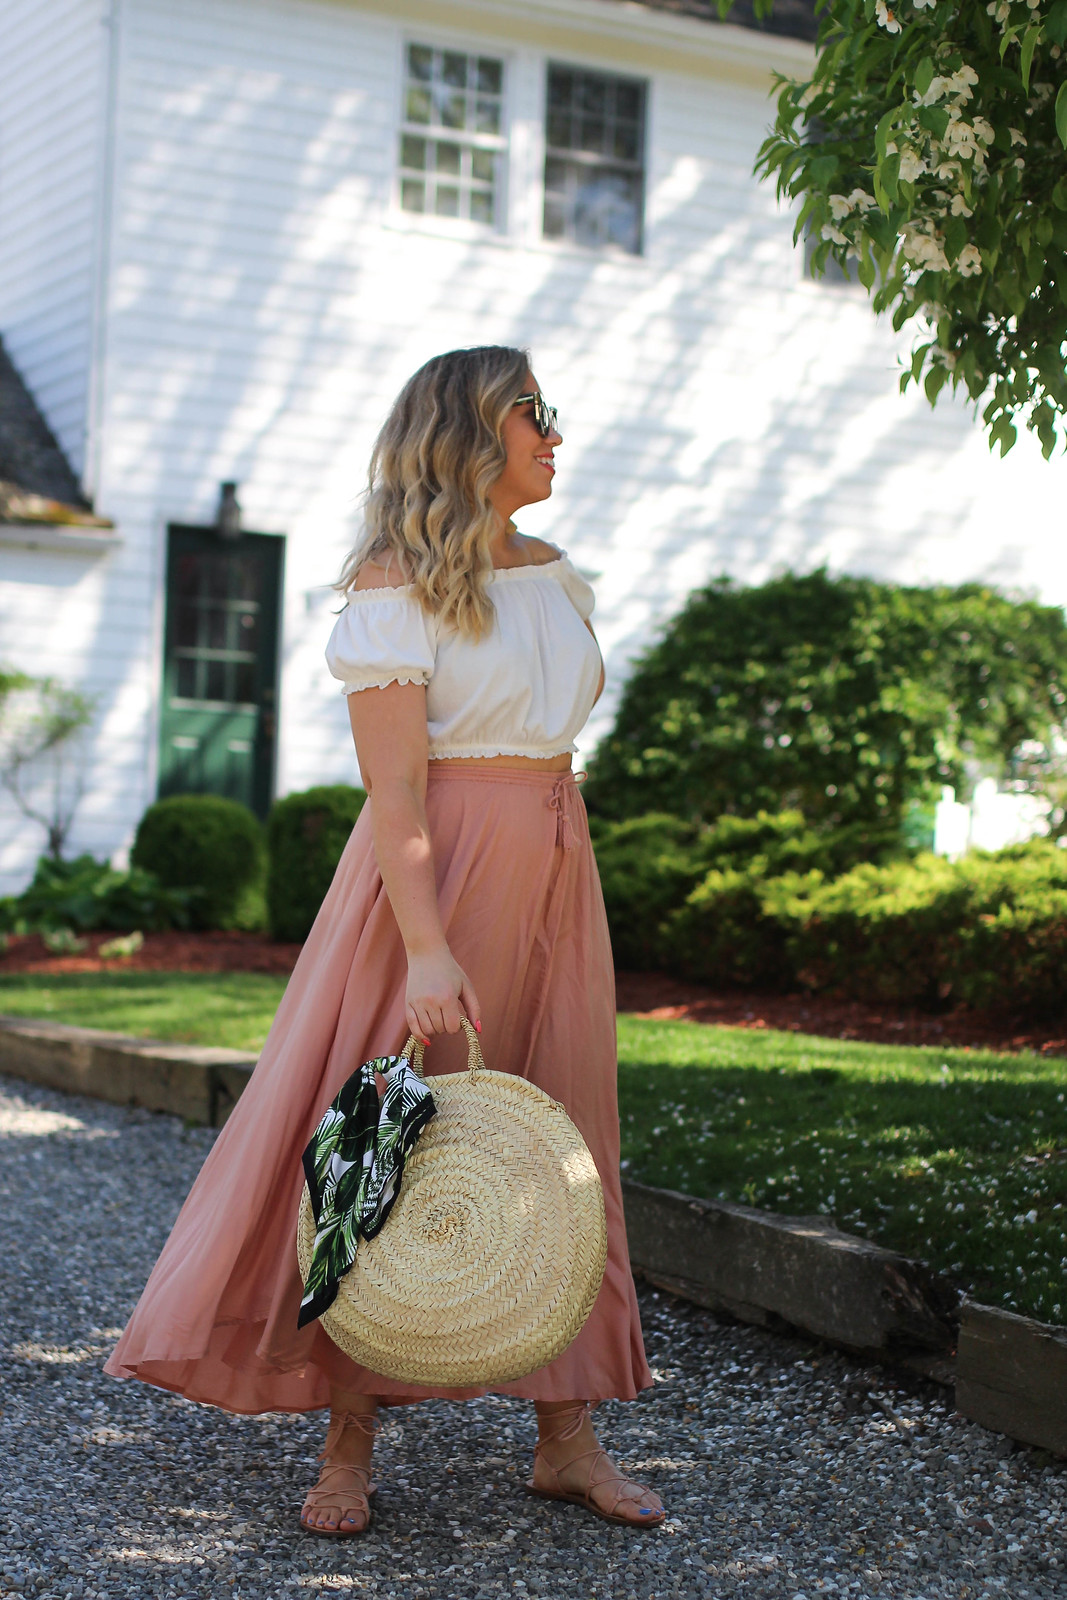 The Only Top You Need to Buy this Summer | Summer Wardrobe Staple | Summer Capsule Wardrobe | Summer Boho Outfit Inspiration| H&M Off the Shoulder White Crop Top | O'Neill Samoa Blush Midi Skirt | Bedford New York Westchester Blogger